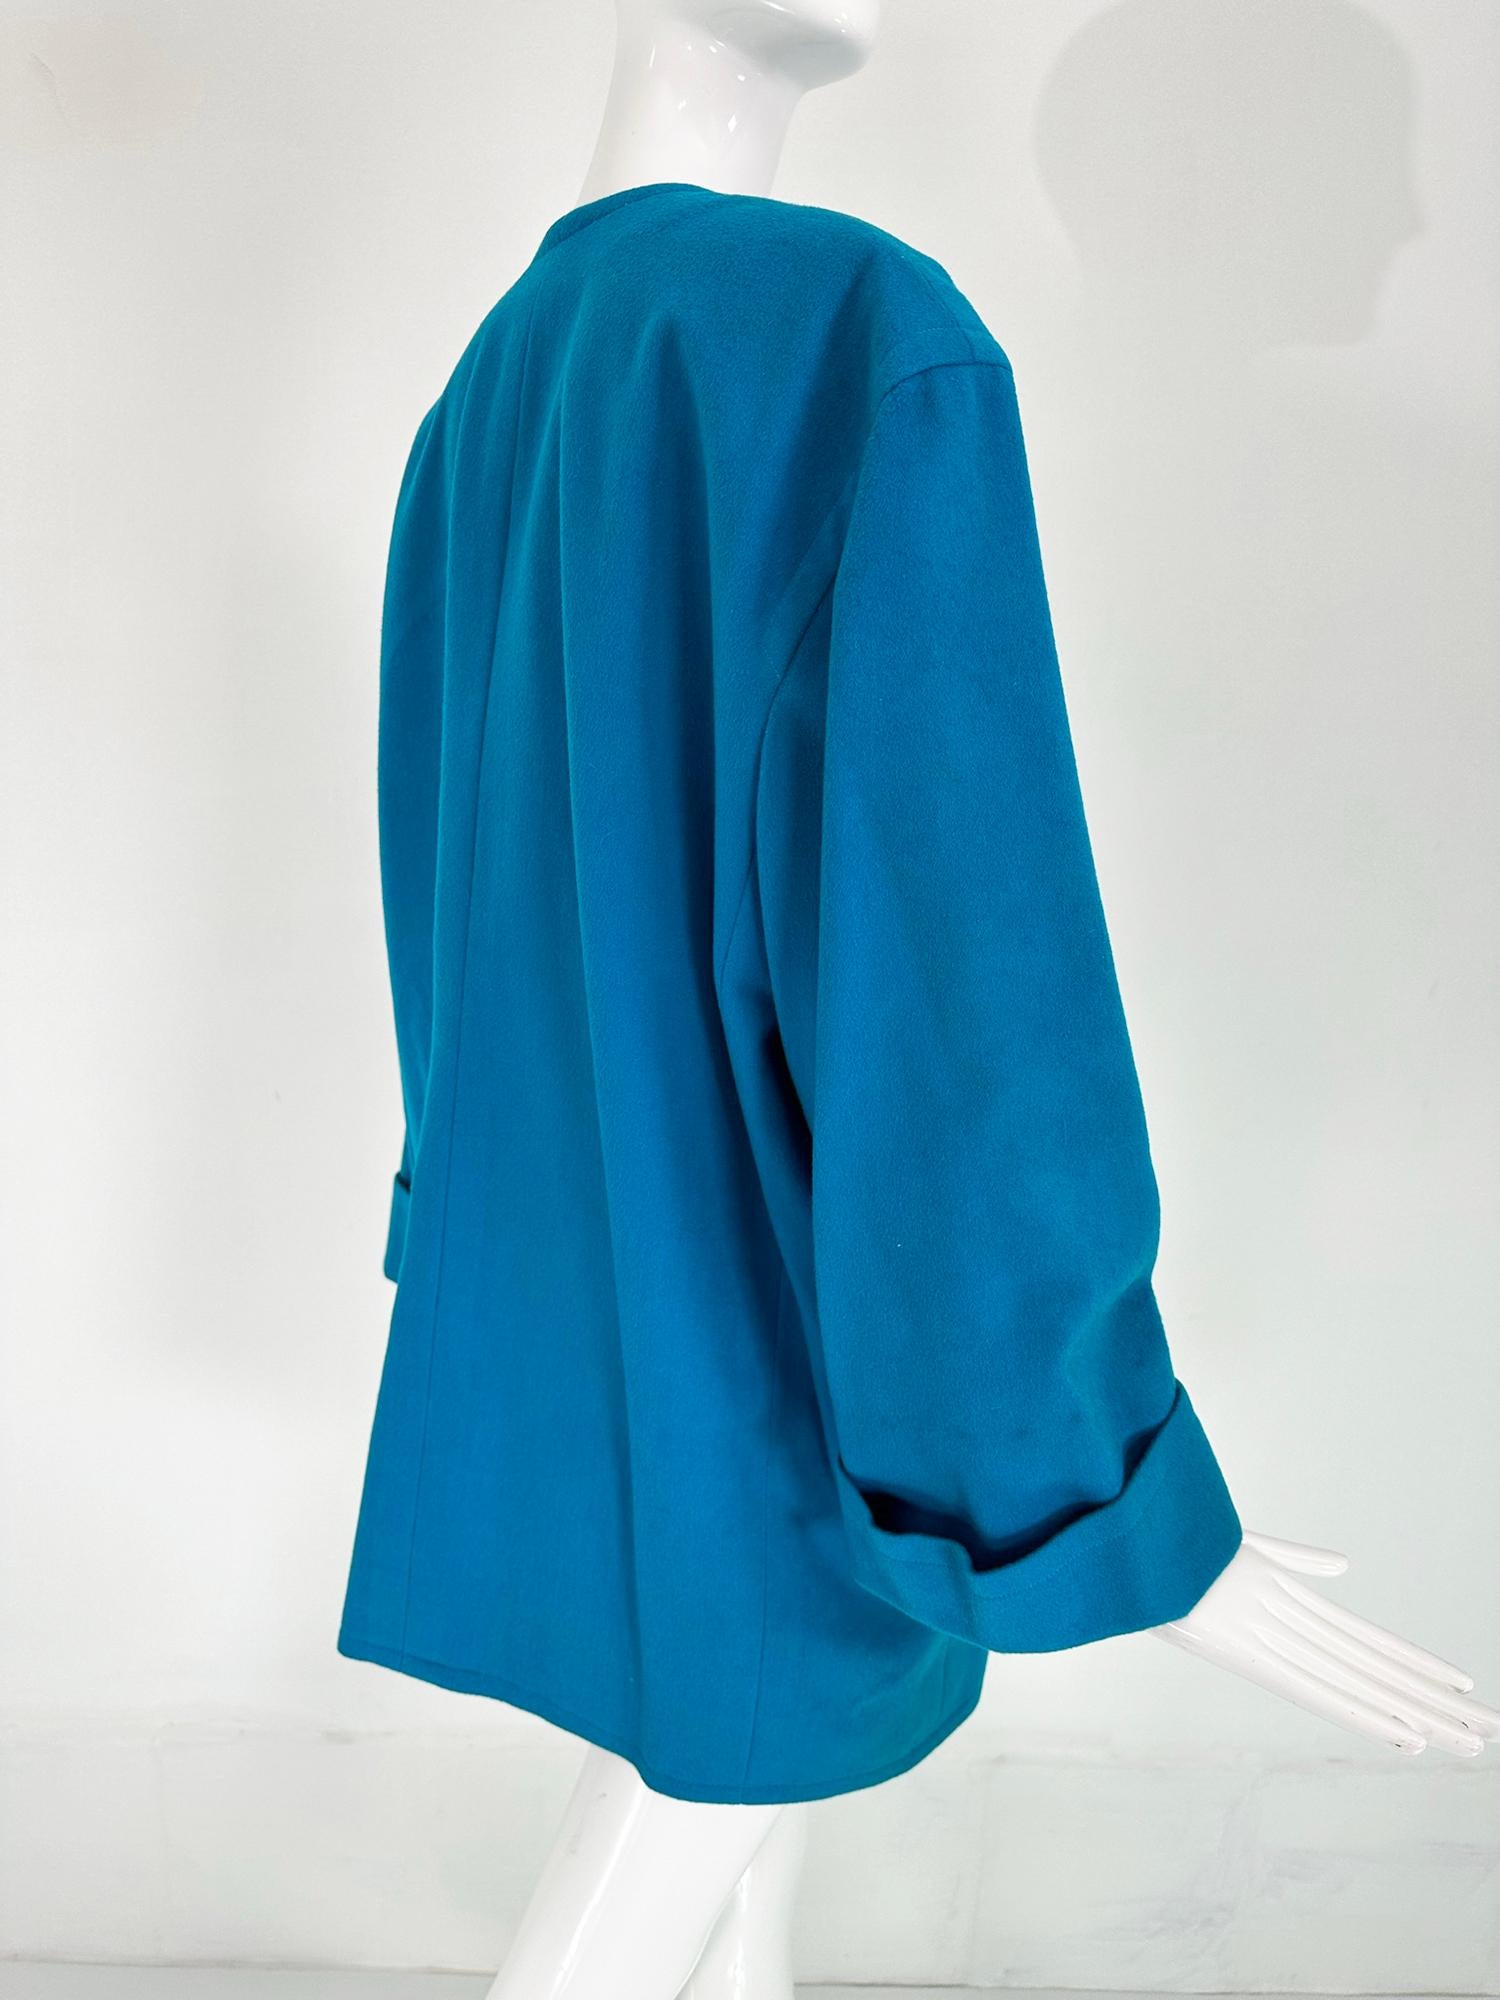 Givenchy Turquoise Wool Open Front Swing Coat with Angled Pockets 1980s In Good Condition For Sale In West Palm Beach, FL